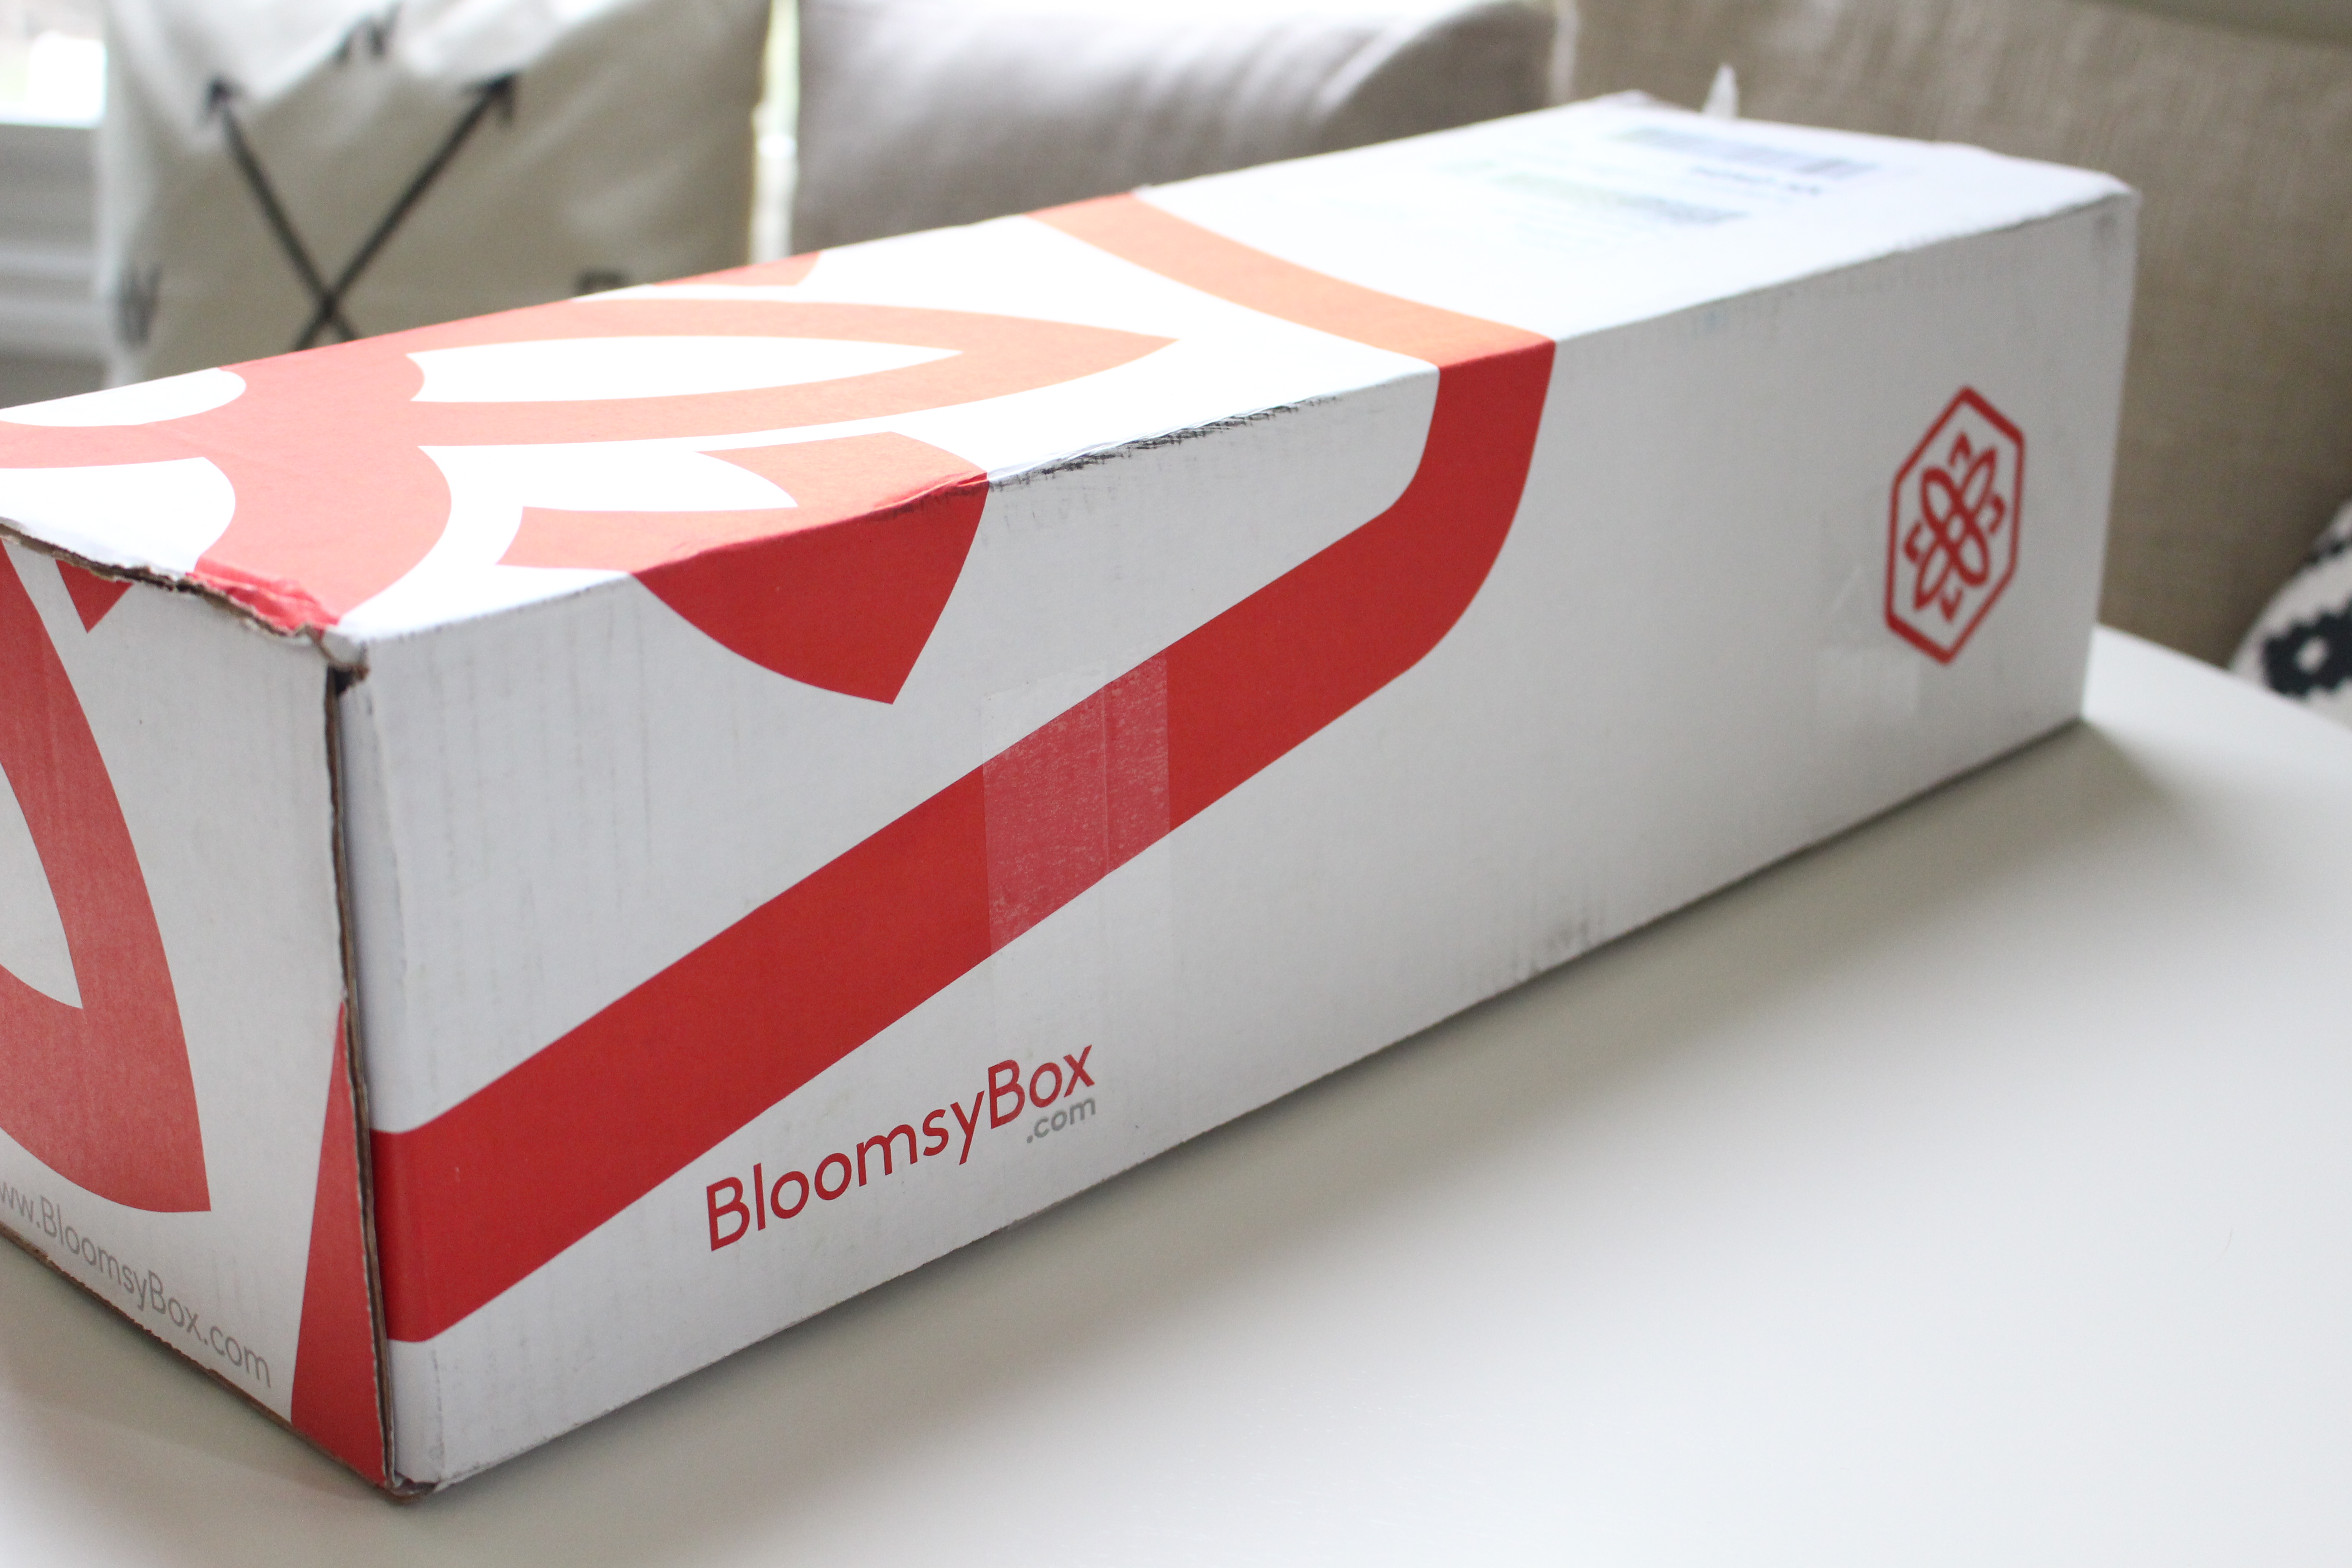 Bloomsy Box Subscription Box by www.whitecottagehomeandliving.com